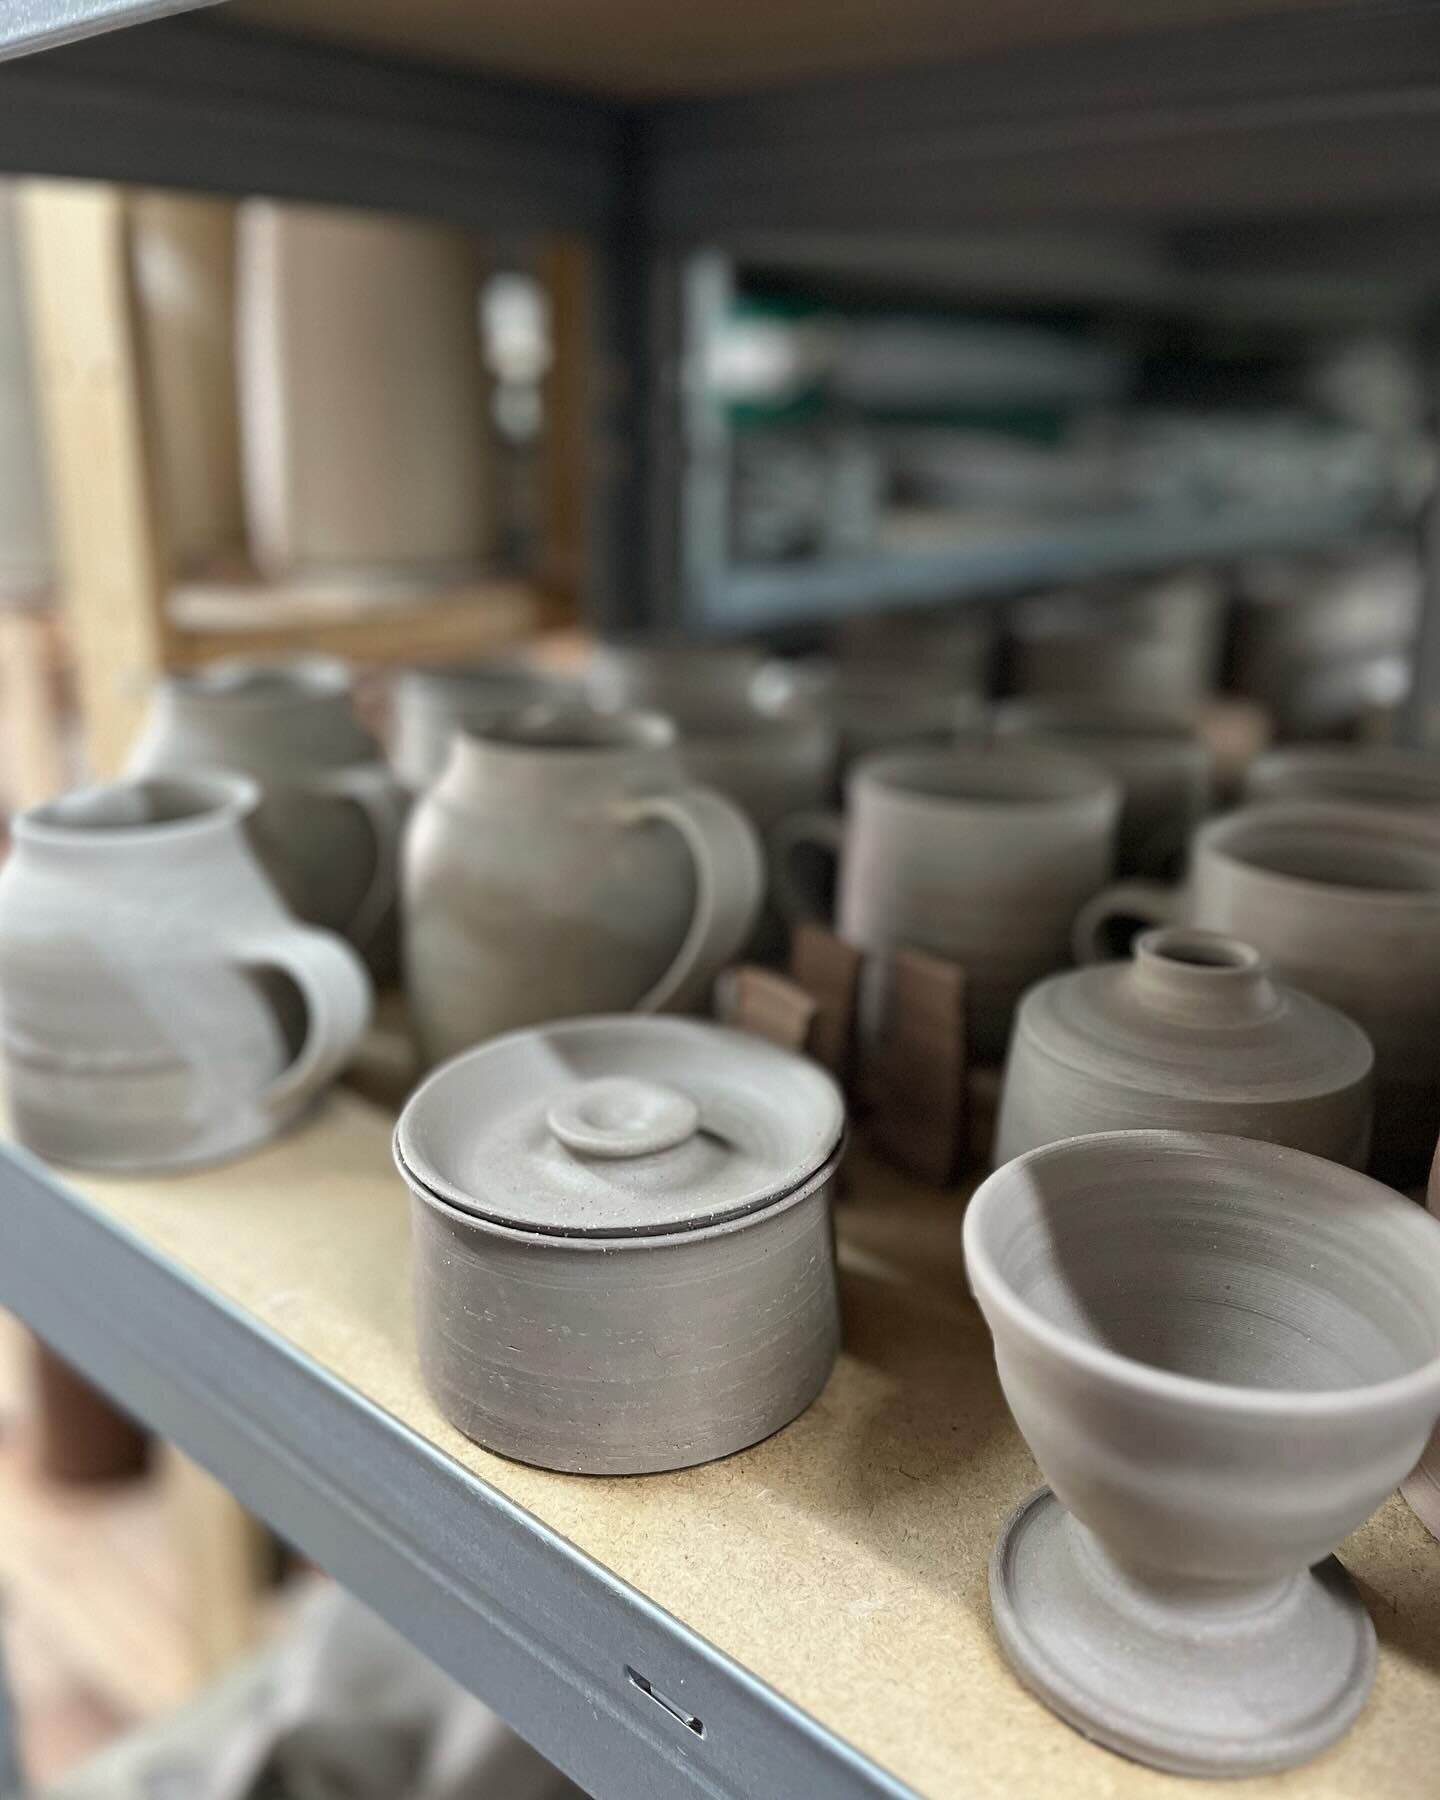 Seasonal shifts have brought about a mood for change, so in between finishing off some commissions this week I&rsquo;ll be firing some new glaze tests, clay blends and sample shapes. Seeing the light streaming into the studio as the cycle of spring t